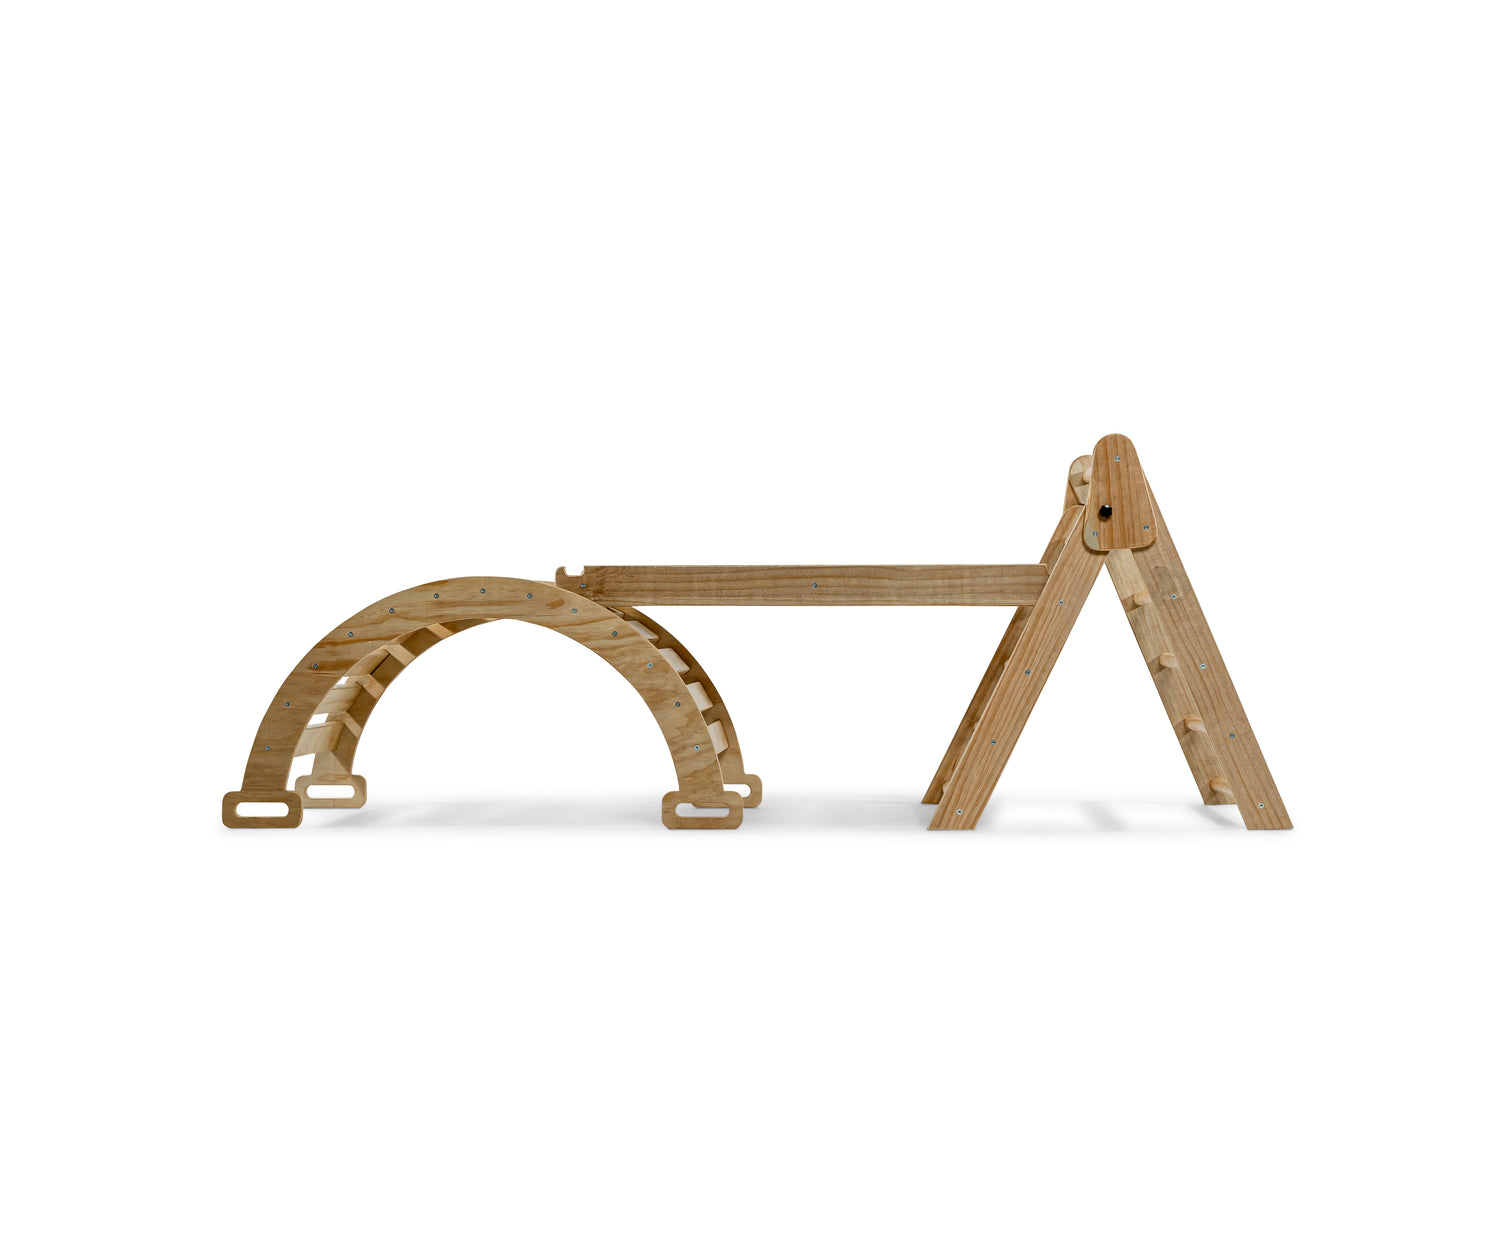 Hazel - Avenlur's Pikler Triangle Ladder with Arch Ramp, Slide, Rocker, and Triangle Rock Climber - Side View